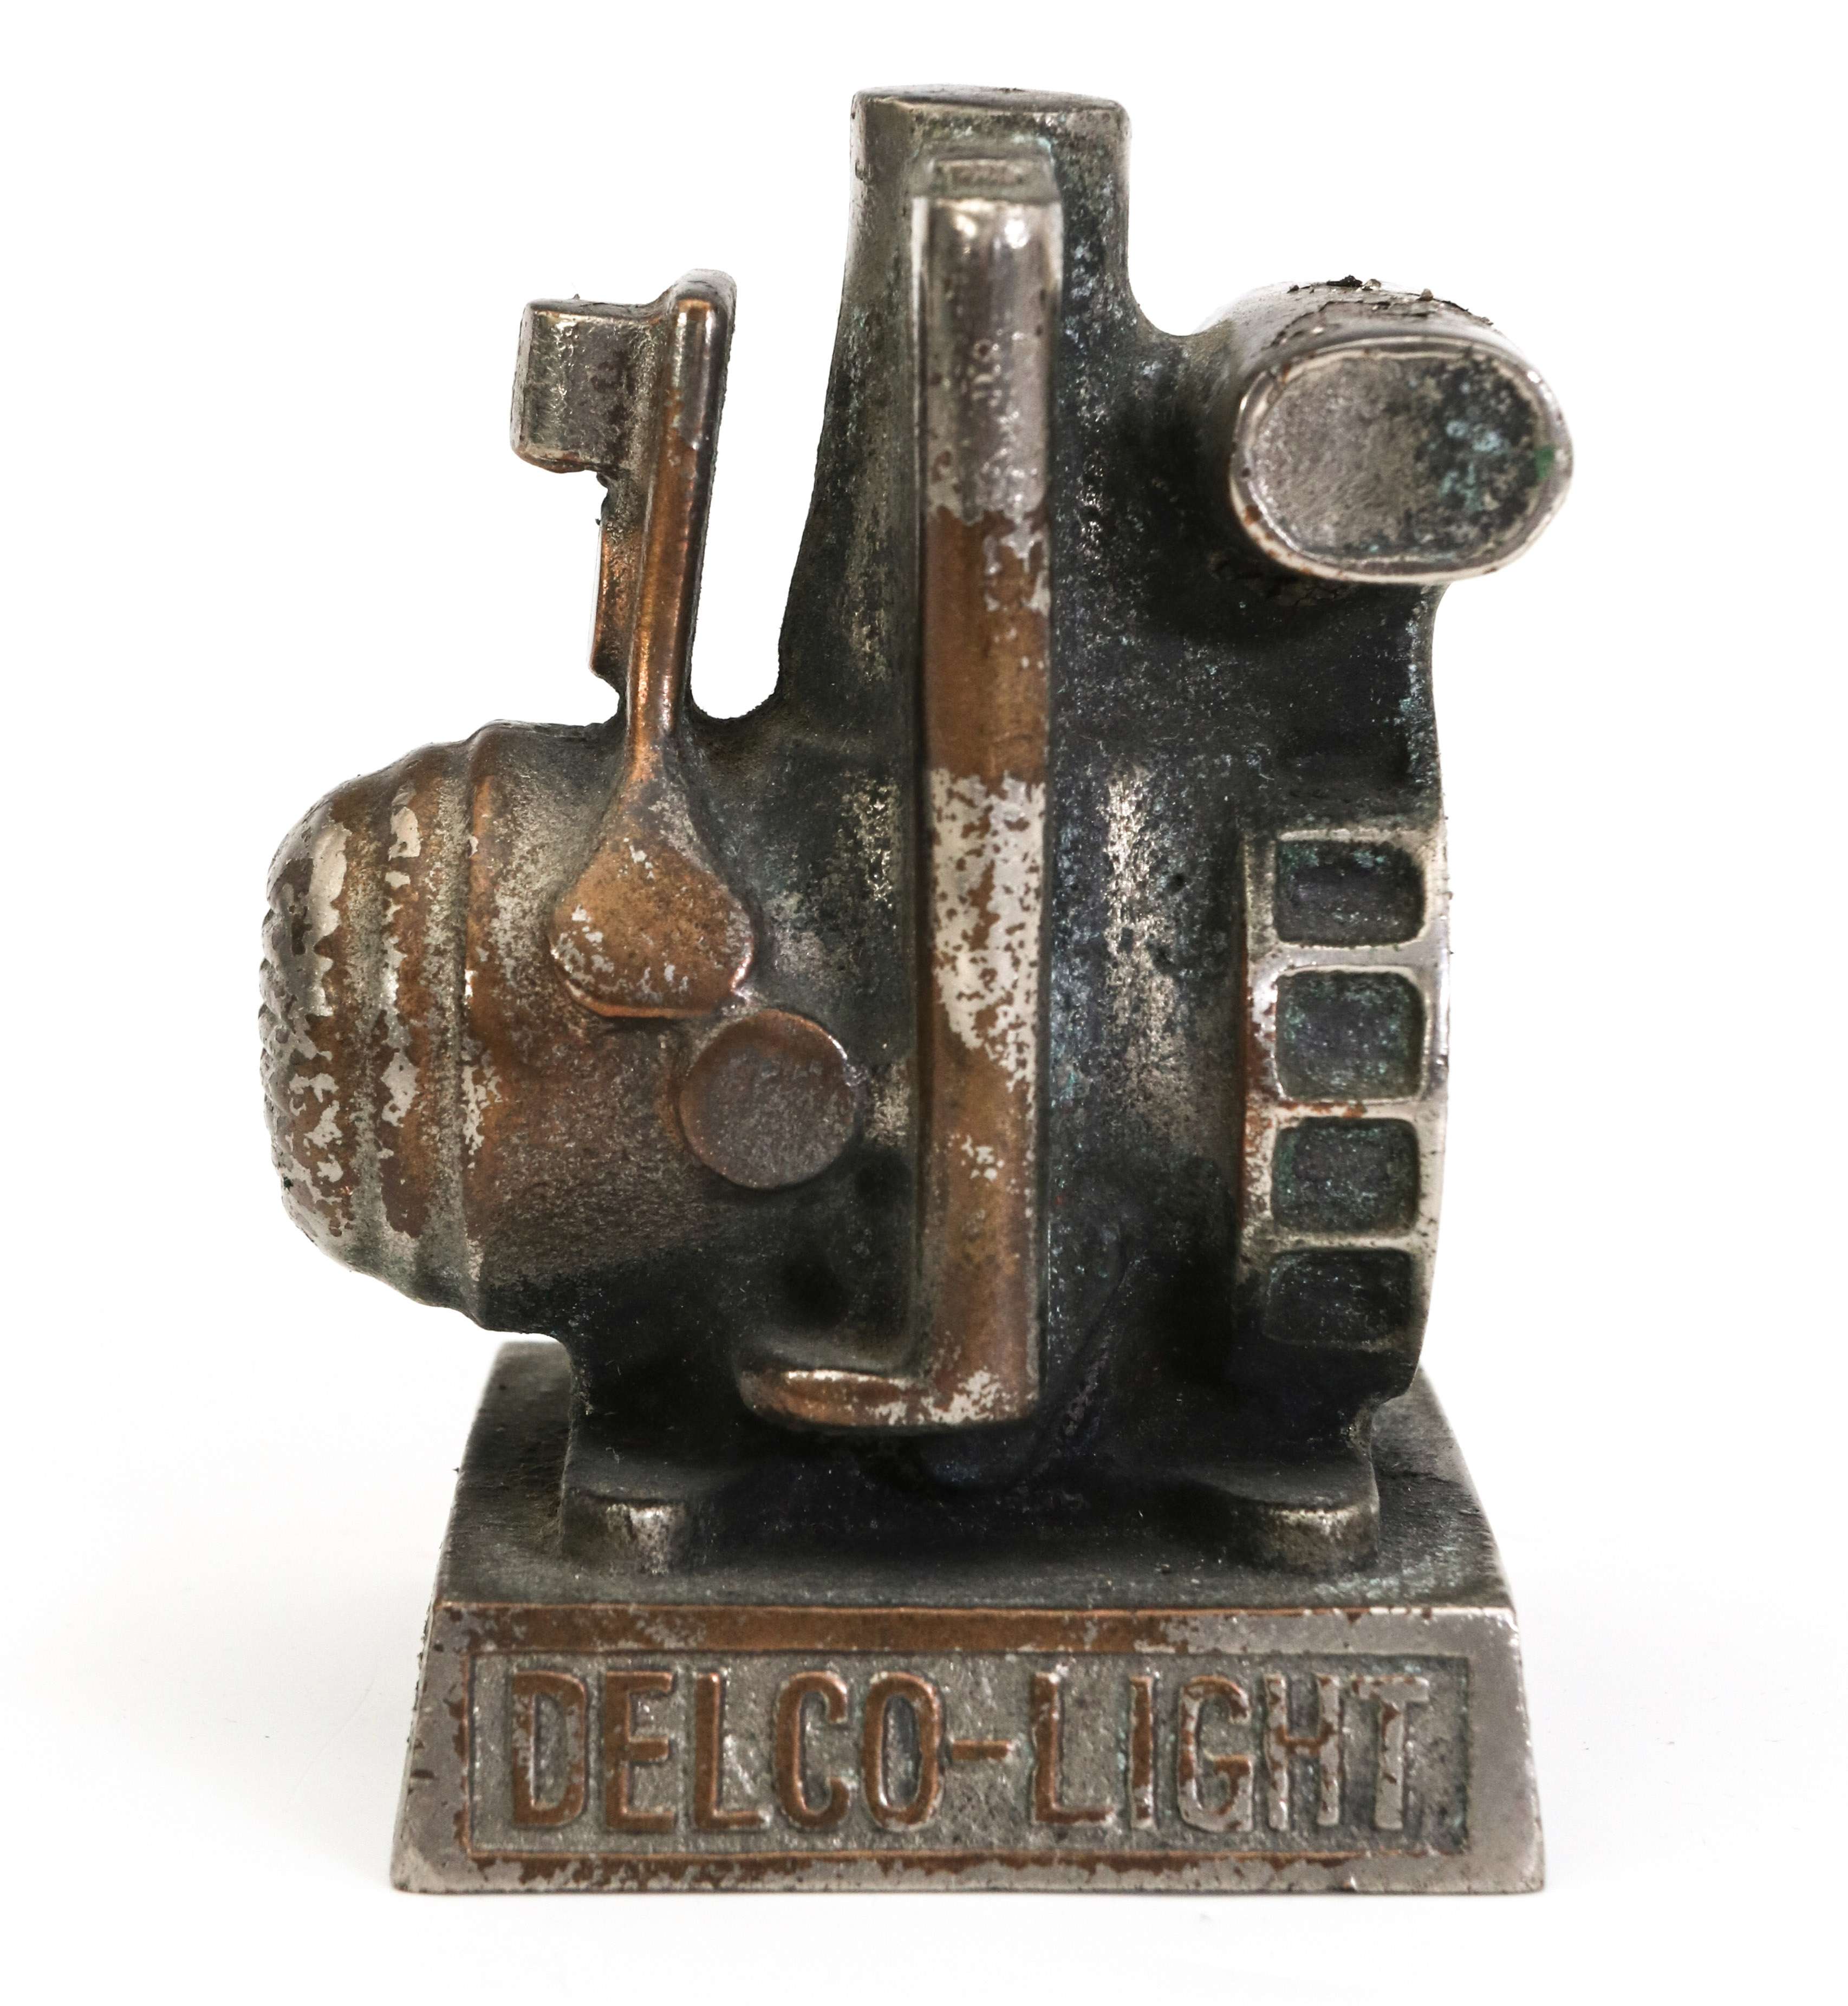 DELCO LIGHT HIT-N-MISS ENGINE ADVERTG PAPERWEIGHT